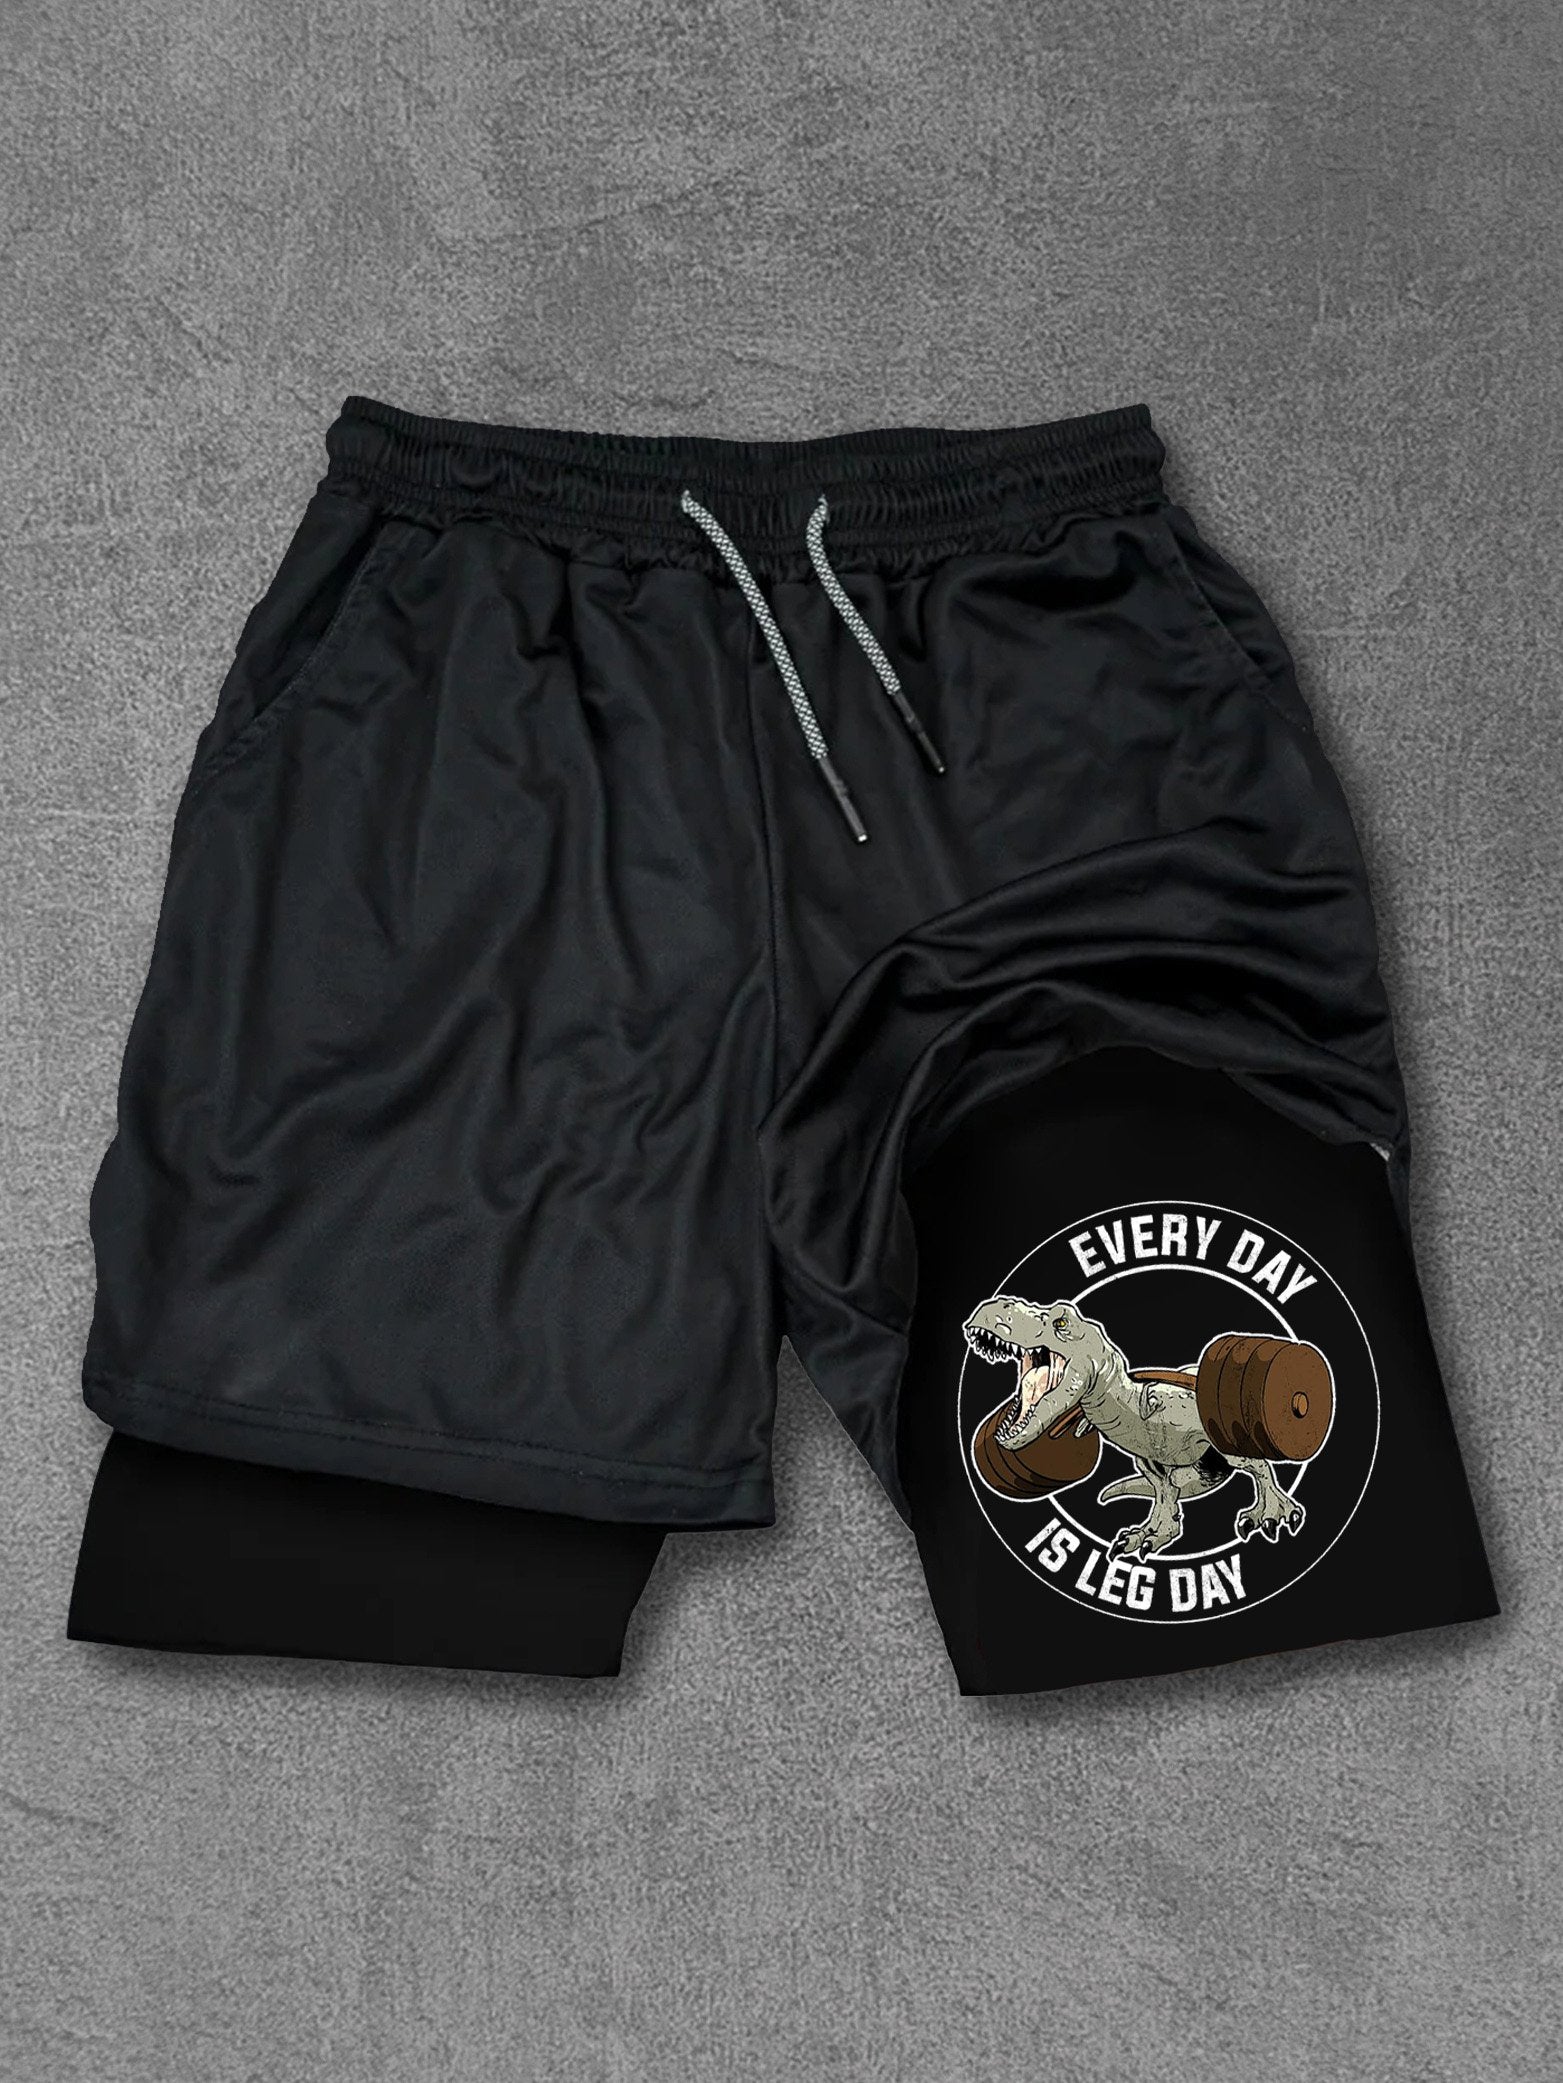 every day is a leg day Performance Training Shorts